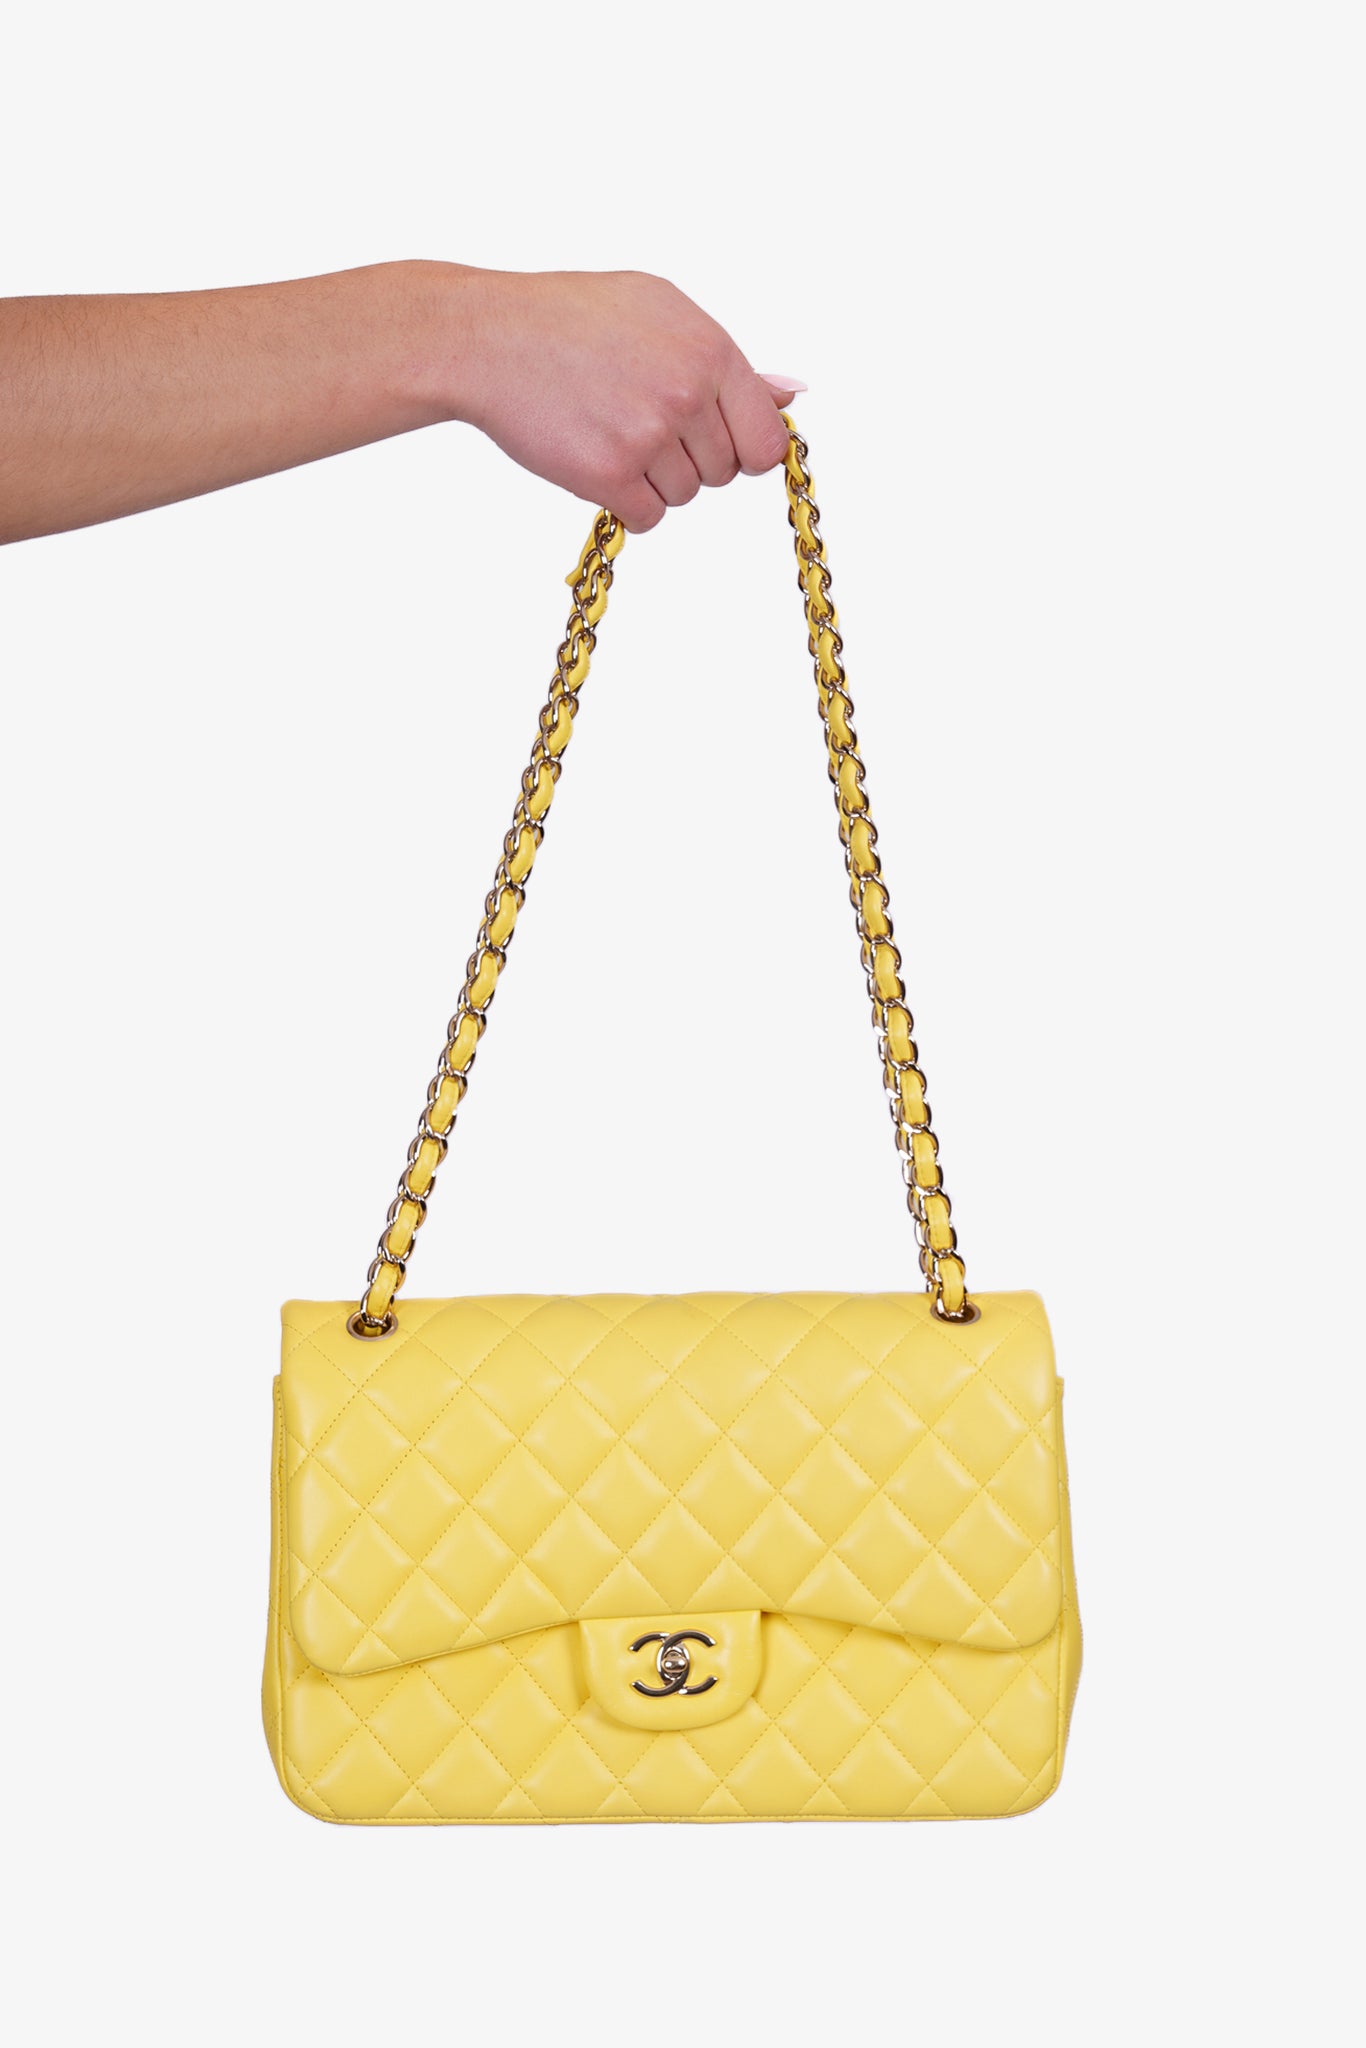 Chanel Yellow & White Quilted Lambskin Side Packs Bag